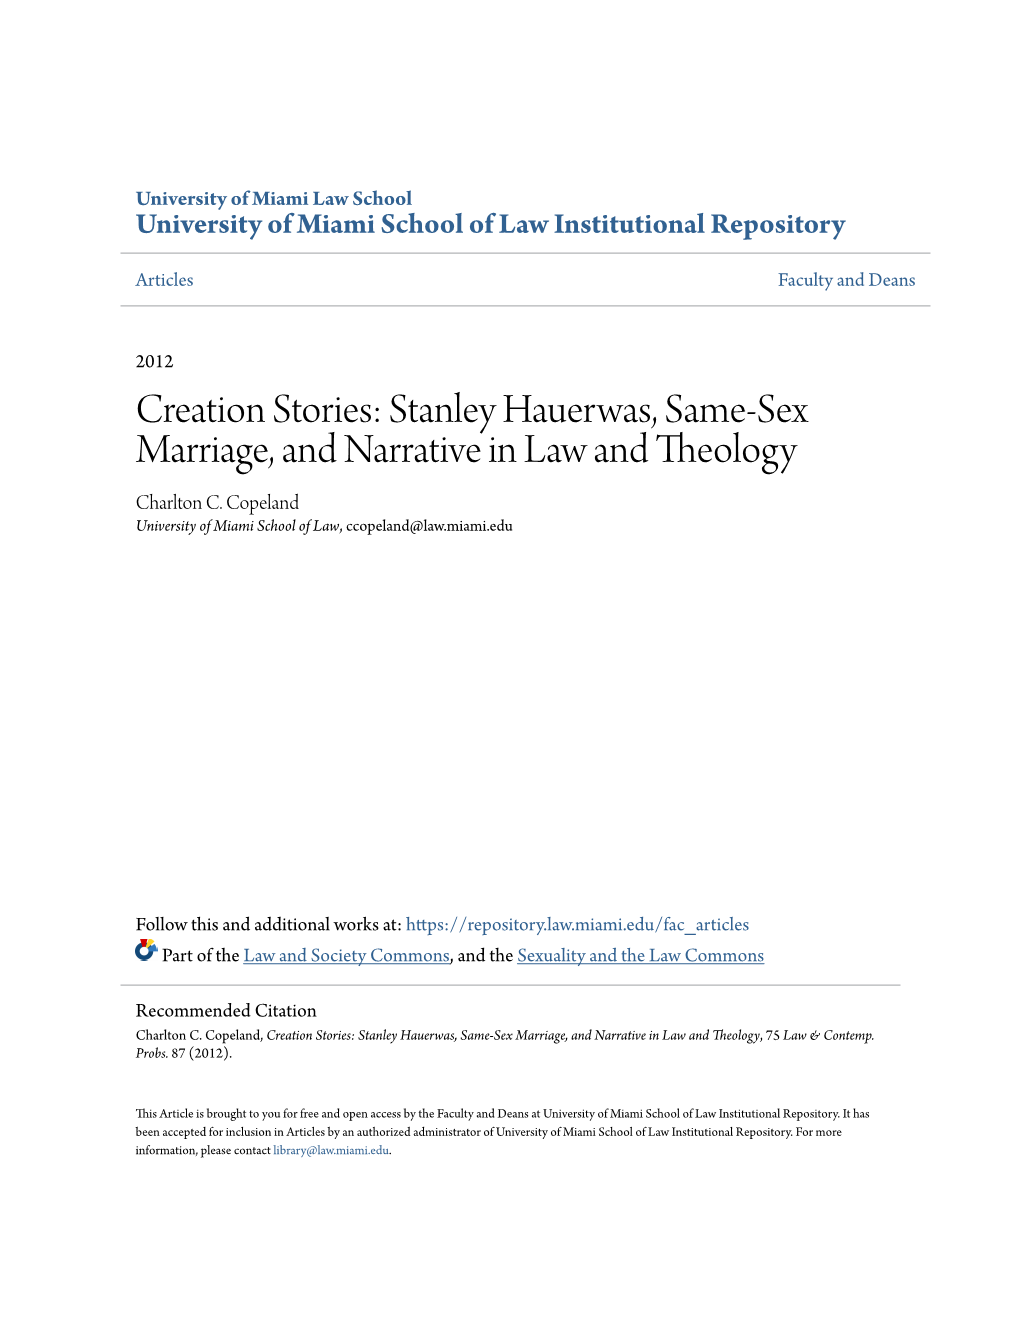 Stanley Hauerwas, Same-Sex Marriage, and Narrative in Law and Theology Charlton C